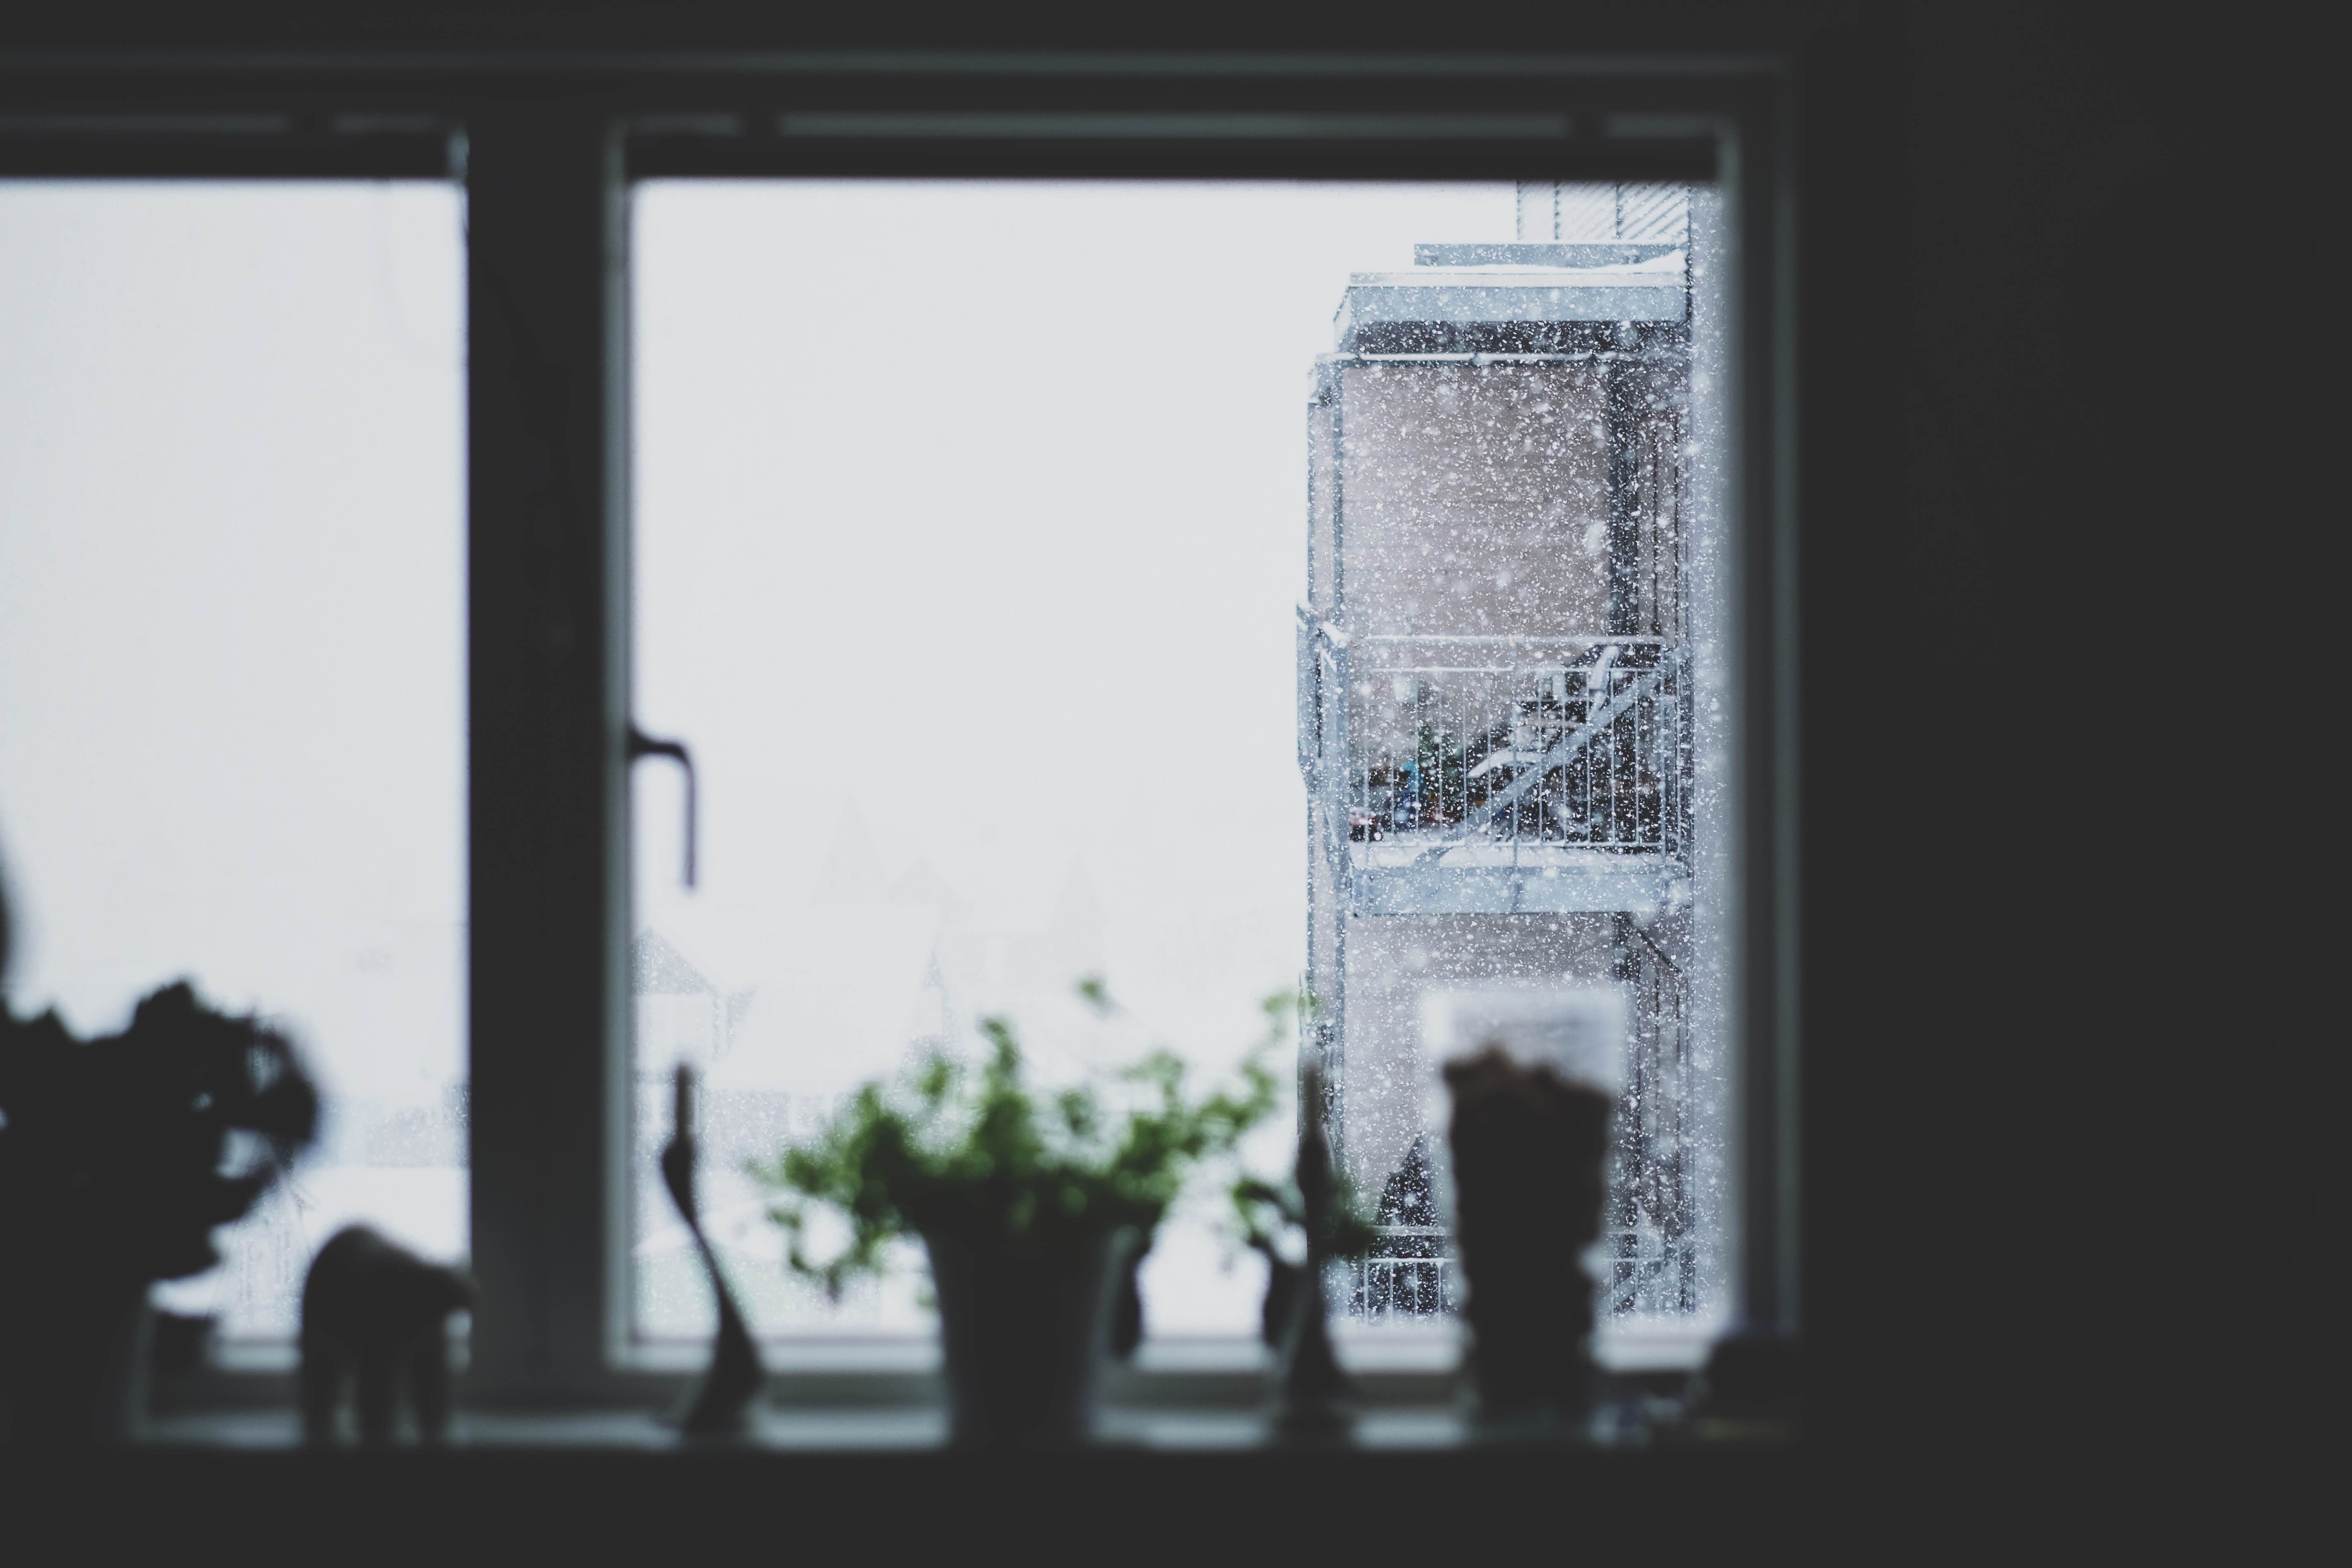 View of snowfall out of a window with plants and decorations on the window sill.